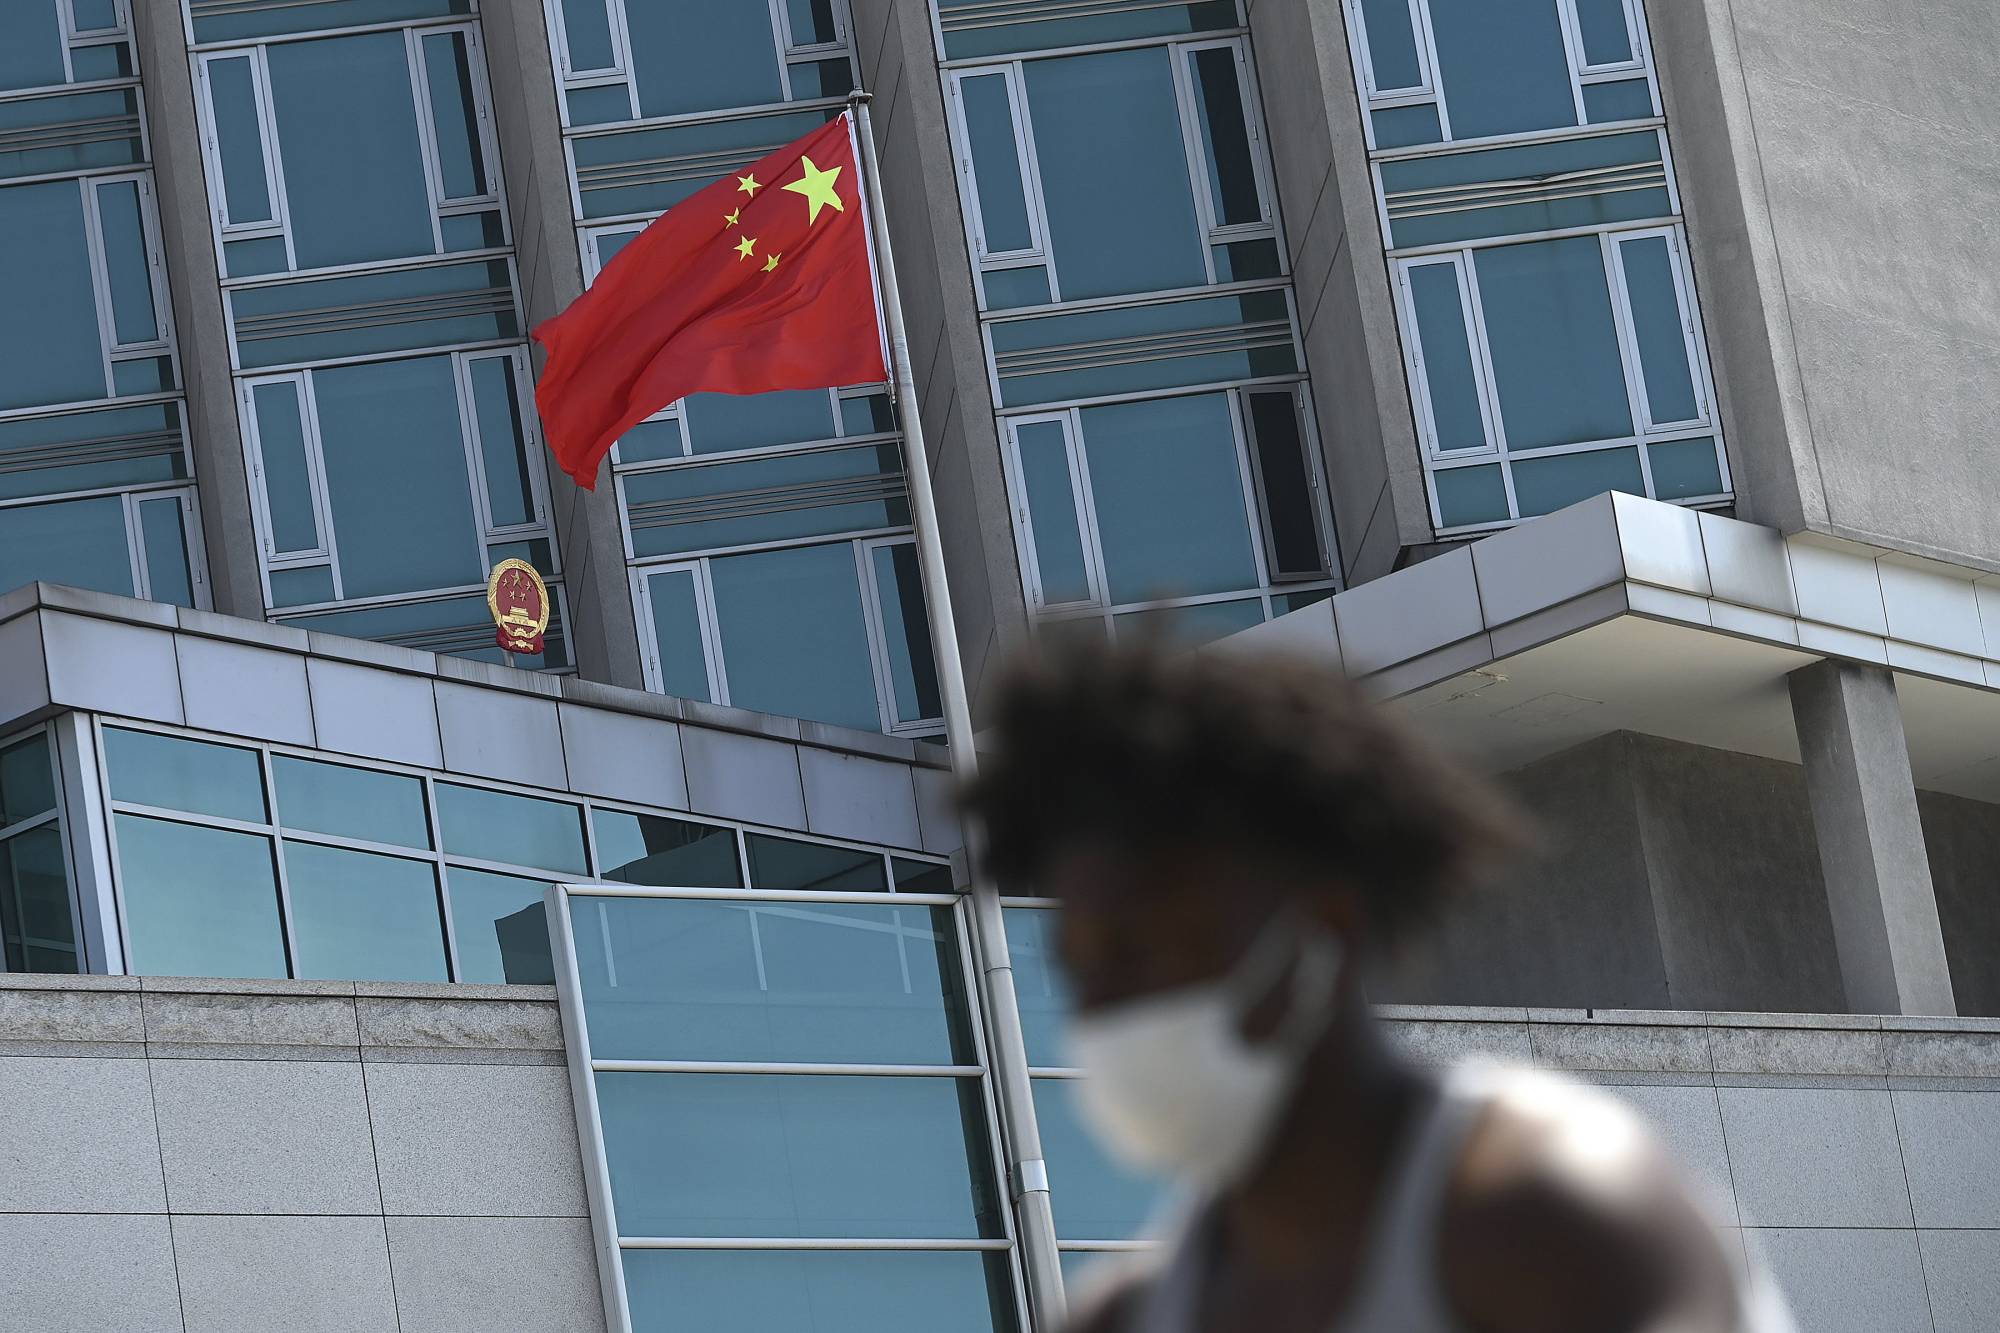 Diplomatic relations between the United States and China reached a low point as the U.S. ordered the shutdown of the Chinese Consulate in Houston on July 23, after it was accused by the Trump administration of economic espionage and stealing scientific research. | SIPA / VIA AP 